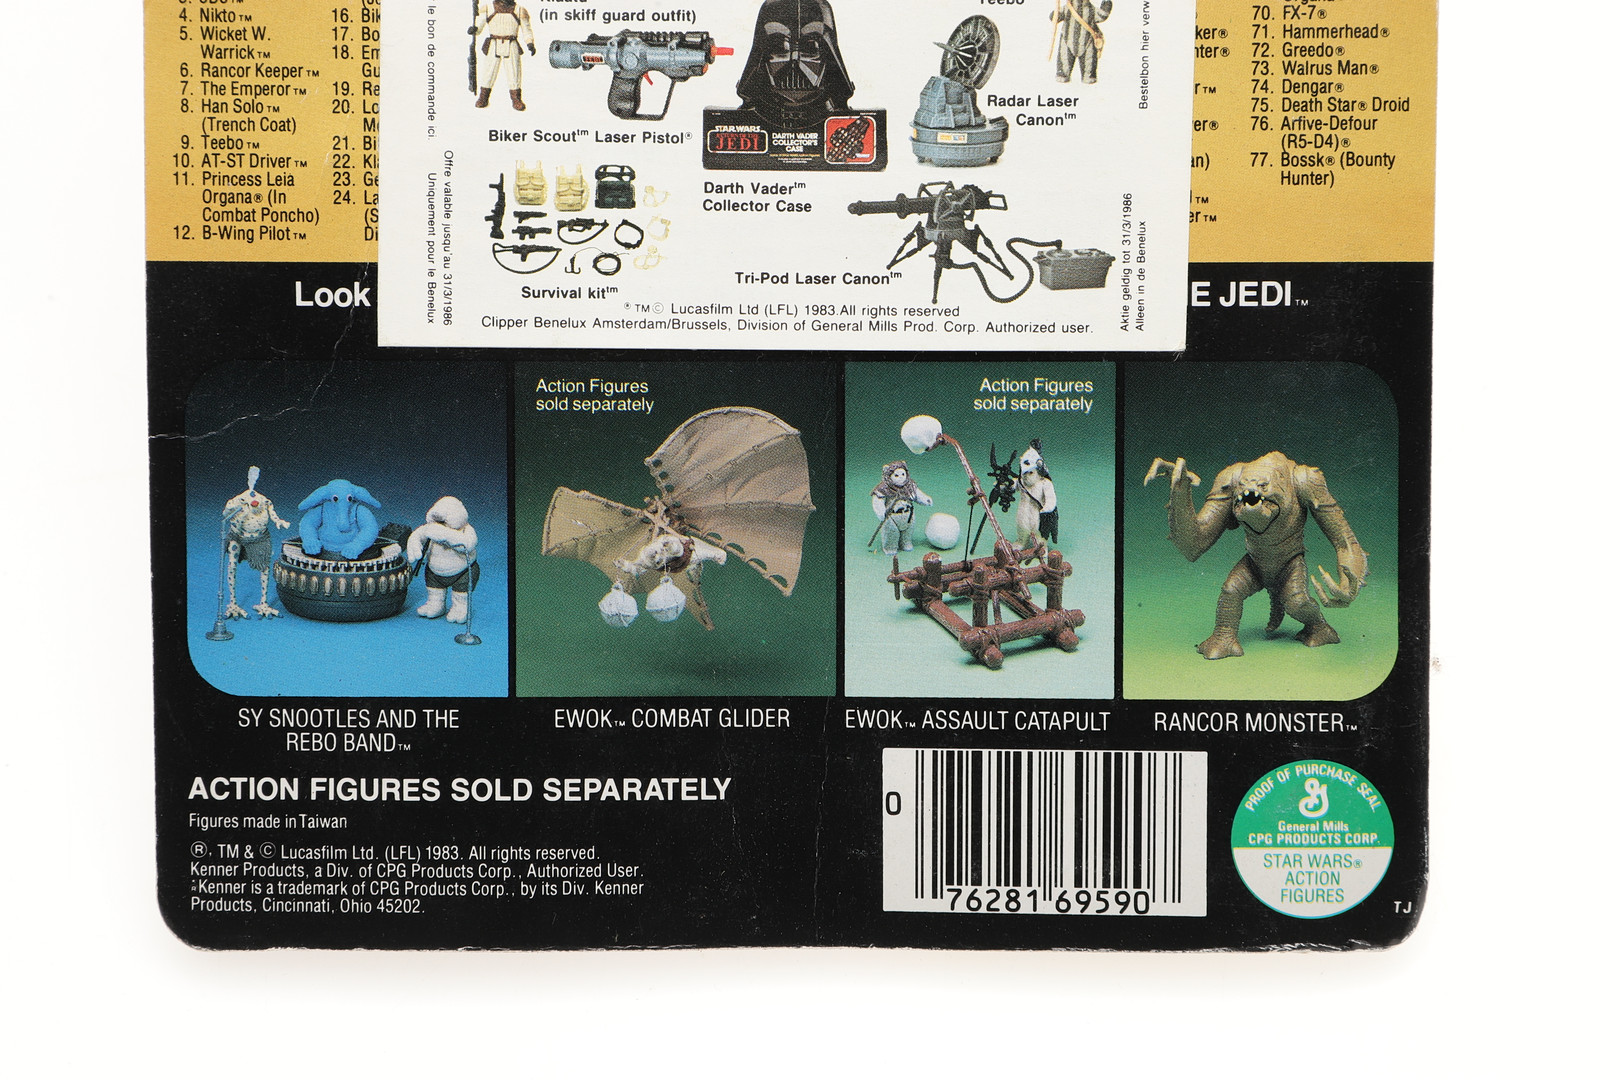 STAR WARS CARDED FIGURES - RETURN OF THE JEDI. - Image 32 of 32